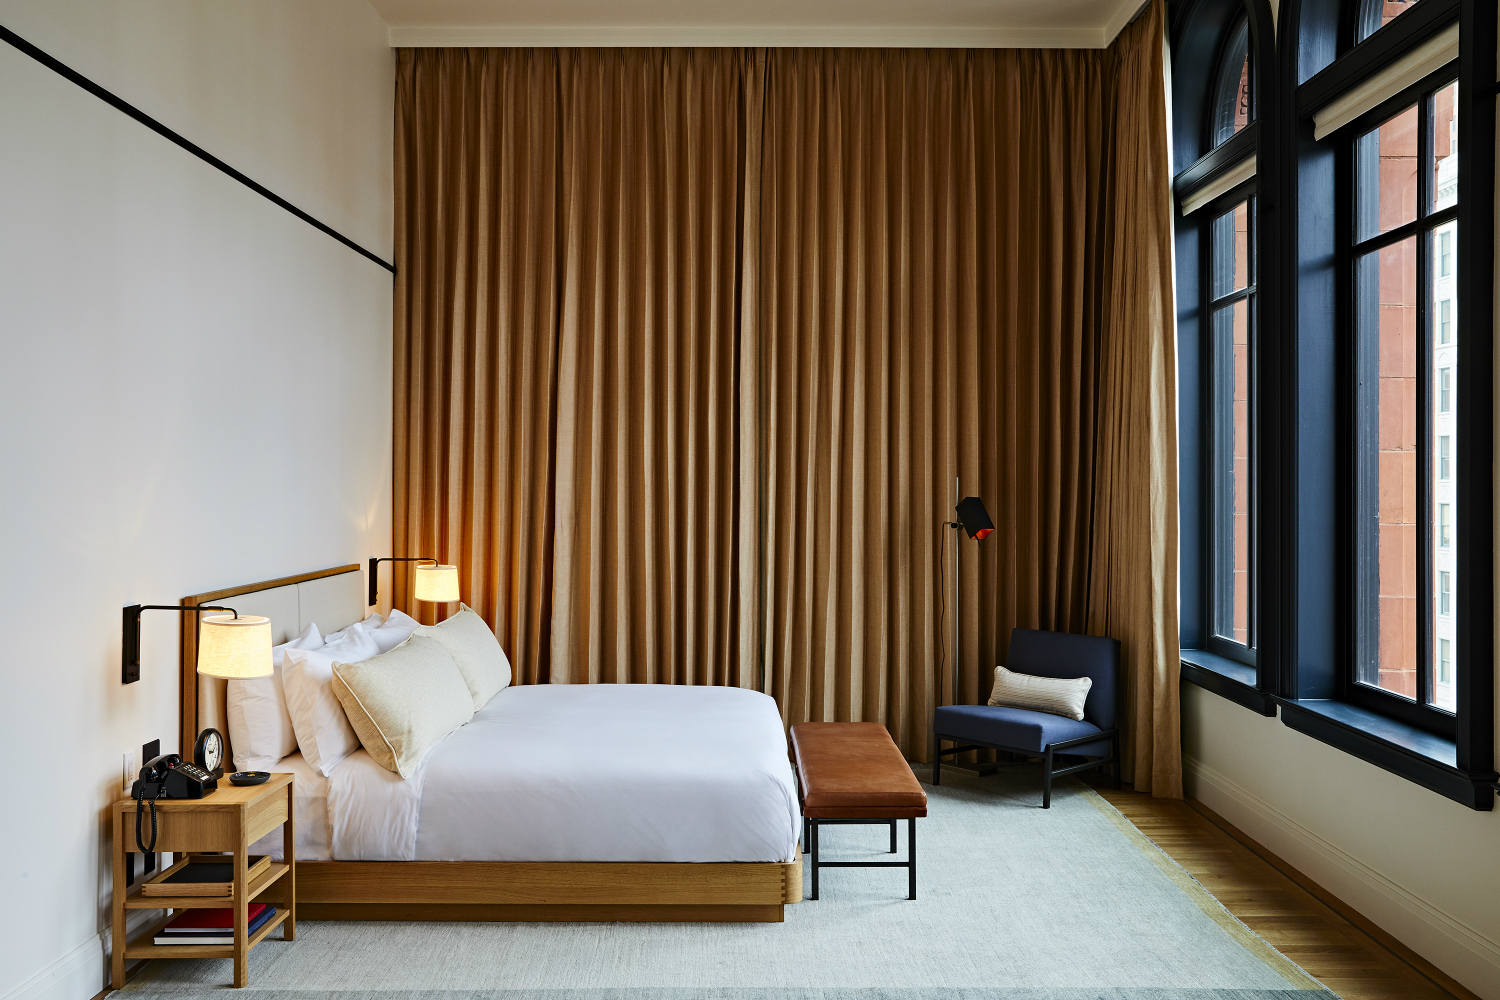 shinola hotel first look guest room 2